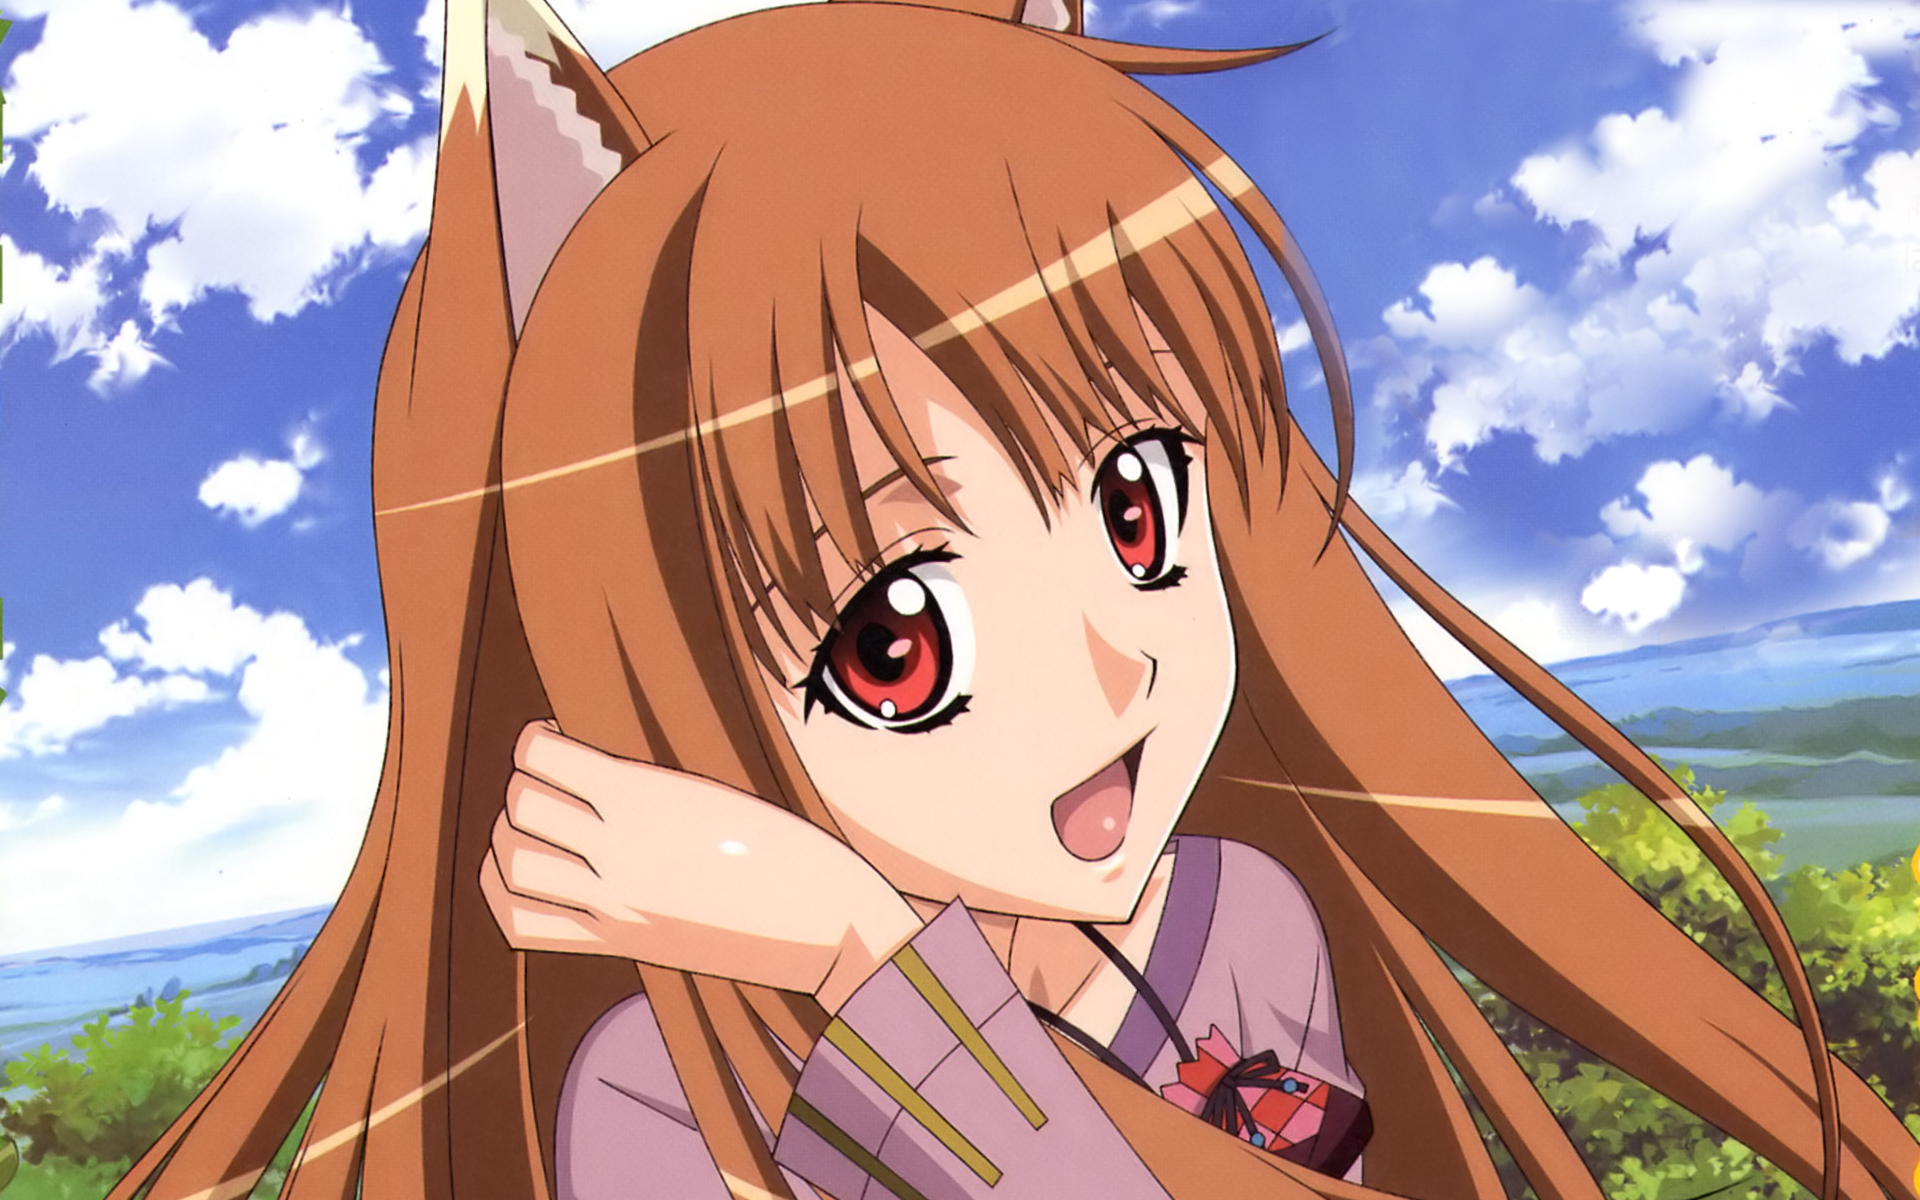 Spice and Wolf: Does It Hold Up? - Anime News Network